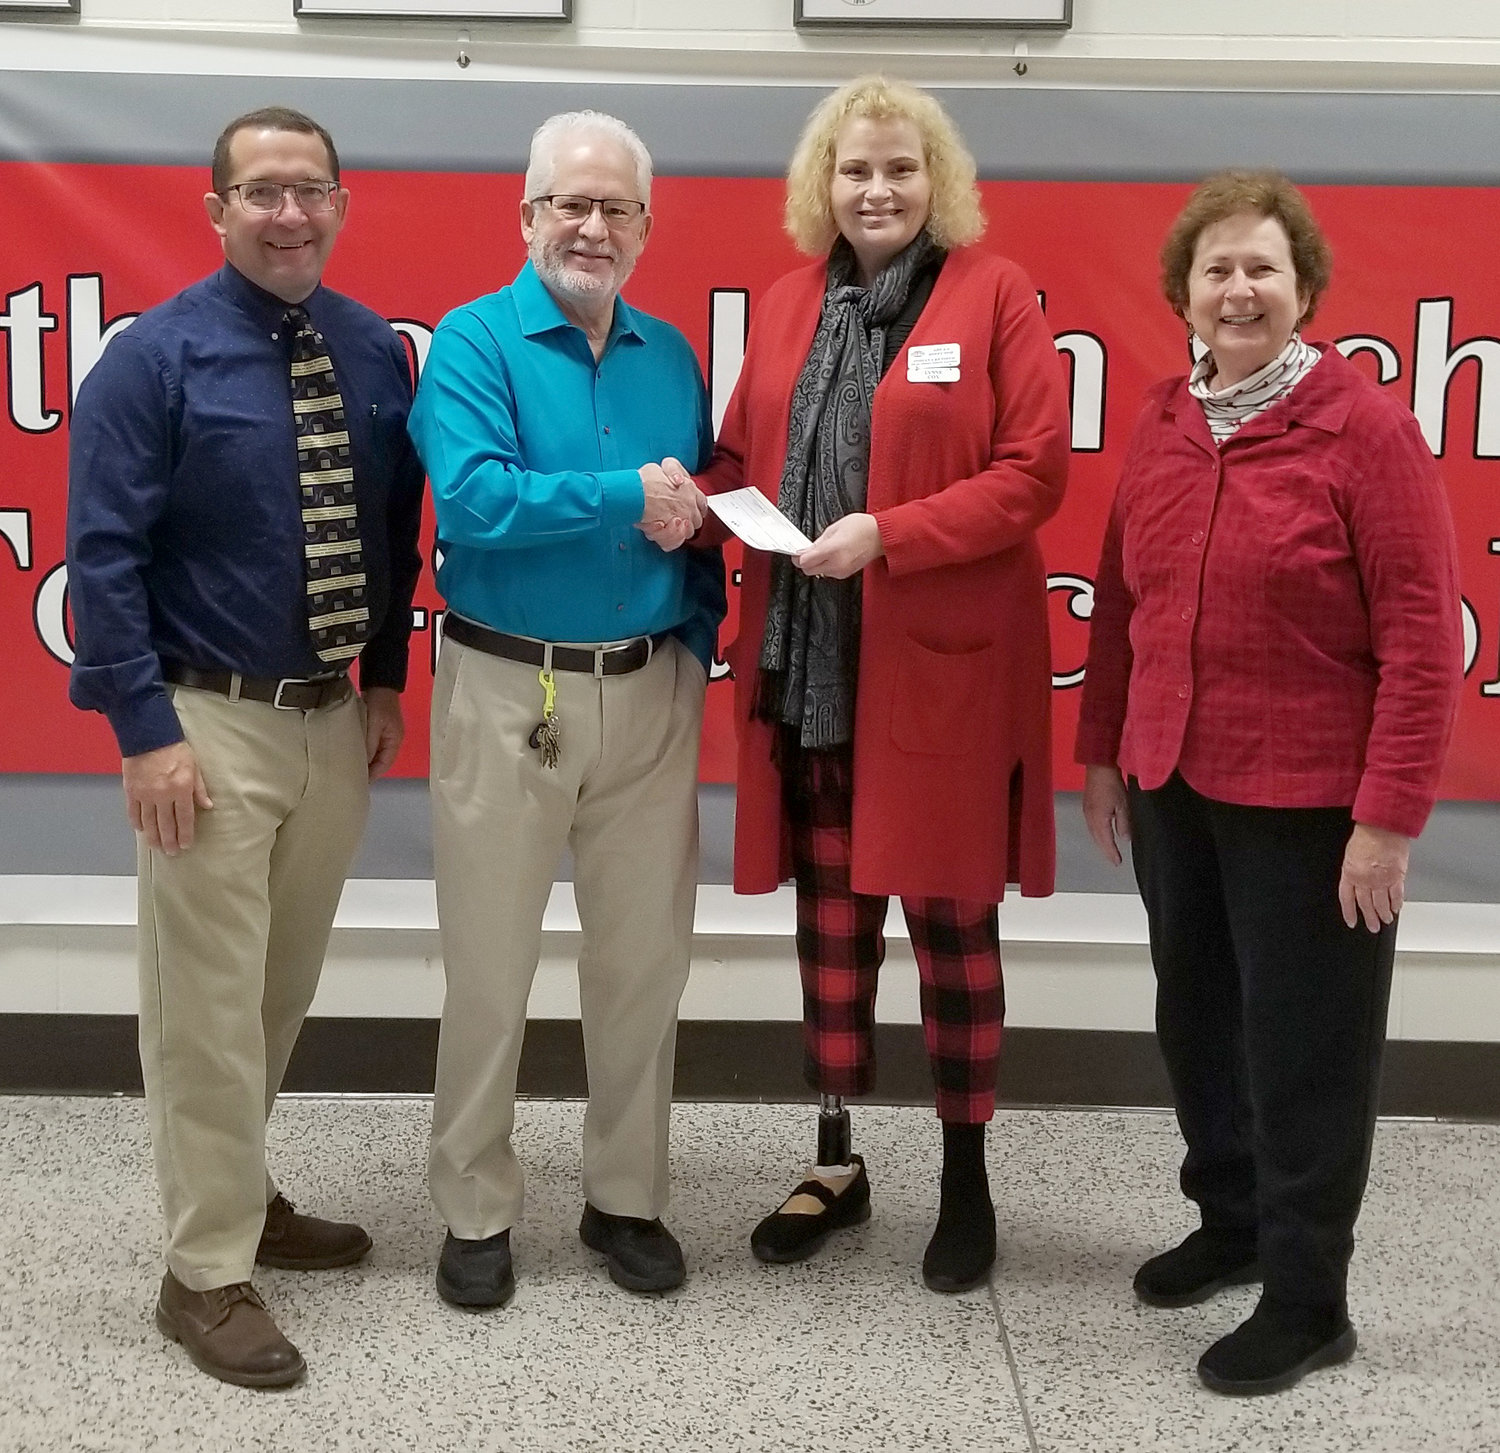 Pictured from left, are Southmont High School Principal Mike Tricker, Active Teacher grant award winner Dale Hughes, Area 4 Director, Lynne Cox and Montgomery County Retired Teacher President Marilyn Spear.